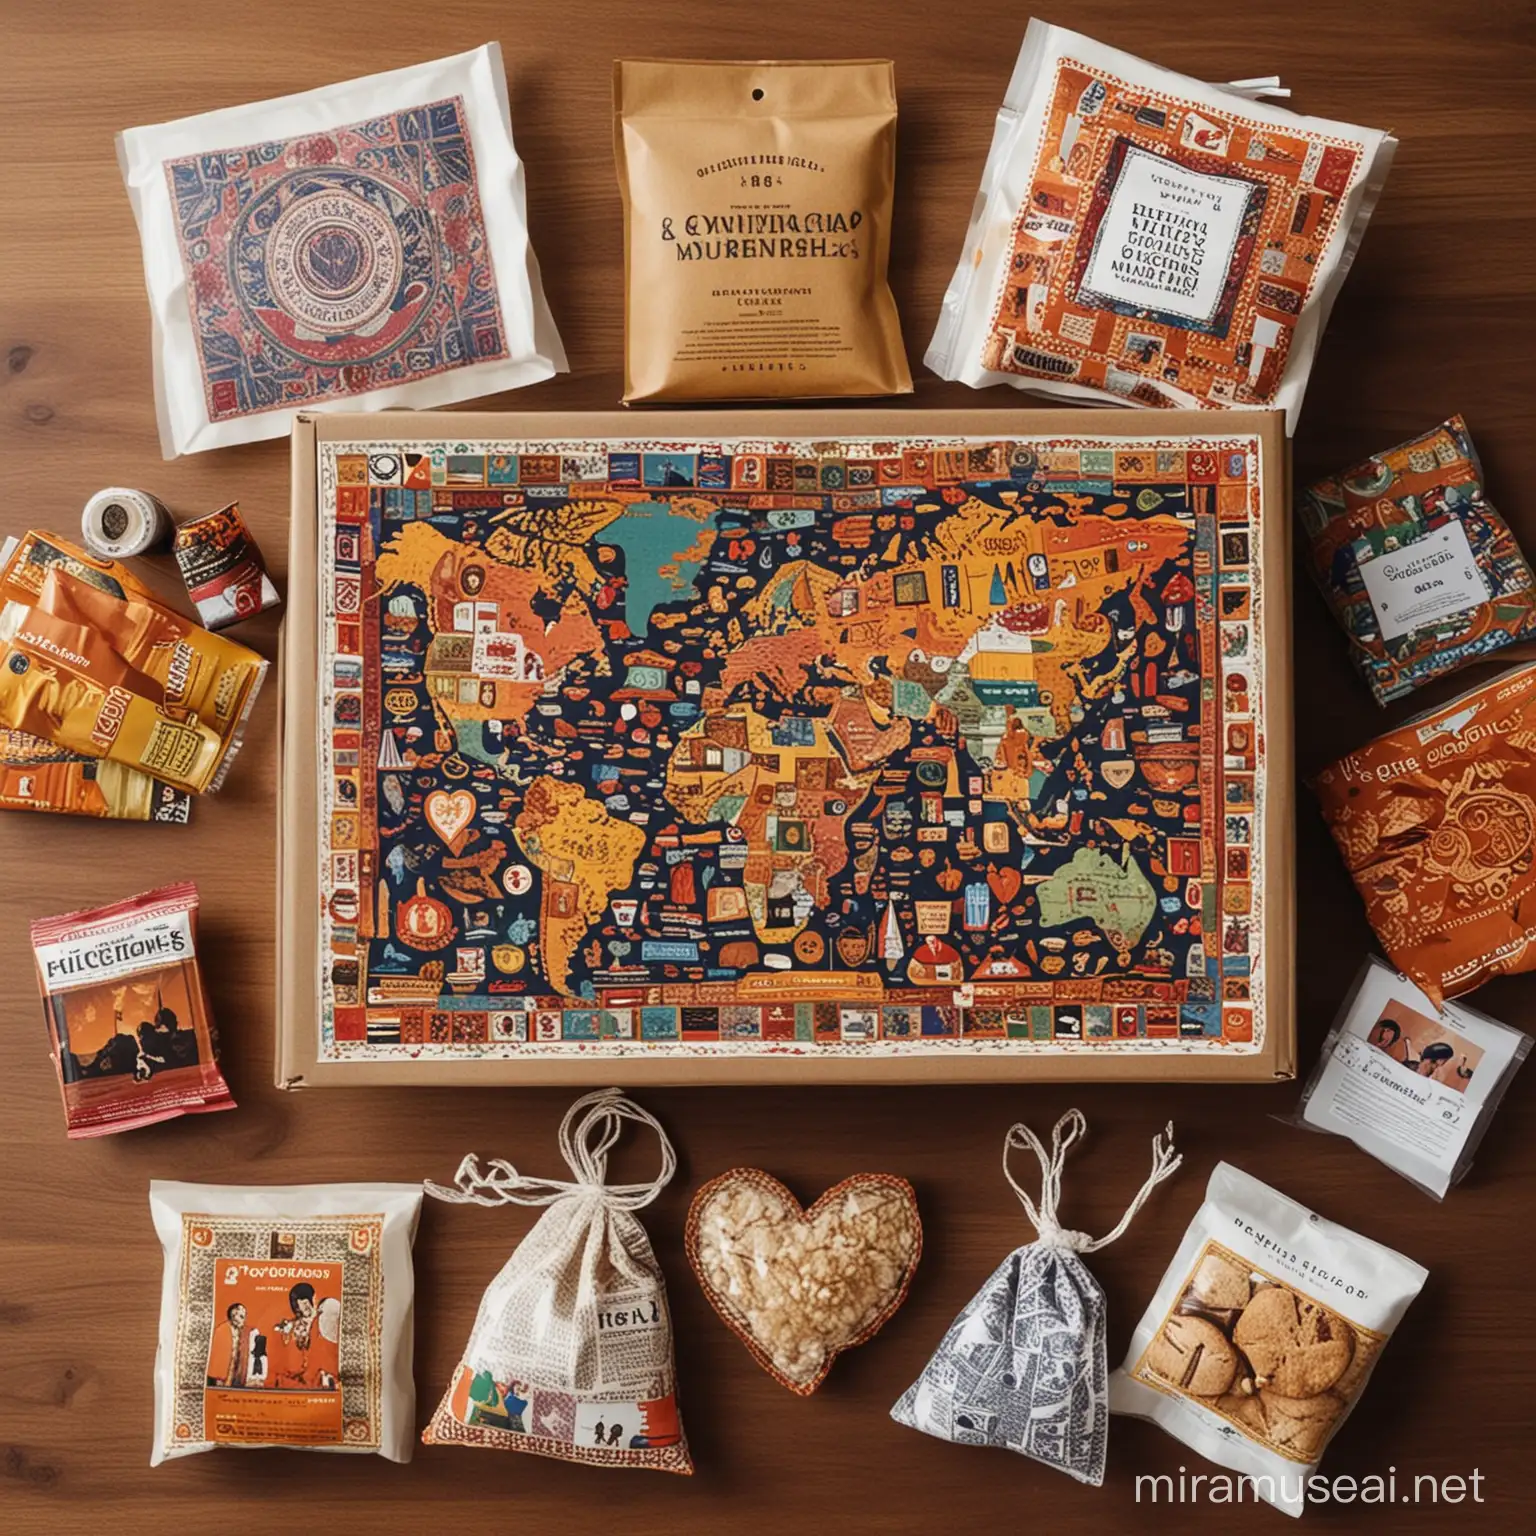 subscription service that delivers a monthly exploration of the world’s diverse cultures directly to your doorstep. Each box is a curated collection of authentic items representing a different country's heritage and traditions, including traditional snacks, handmade crafts, vibrant music playlists, and engaging activities. Our mission is to foster global understanding and appreciation by bringing the richness of the world's cultures into the homes and hearts of our subscribers. Through each box, we aim to create a tapestry of global connectivity, celebrating the unique beauty and stories of all peoples.